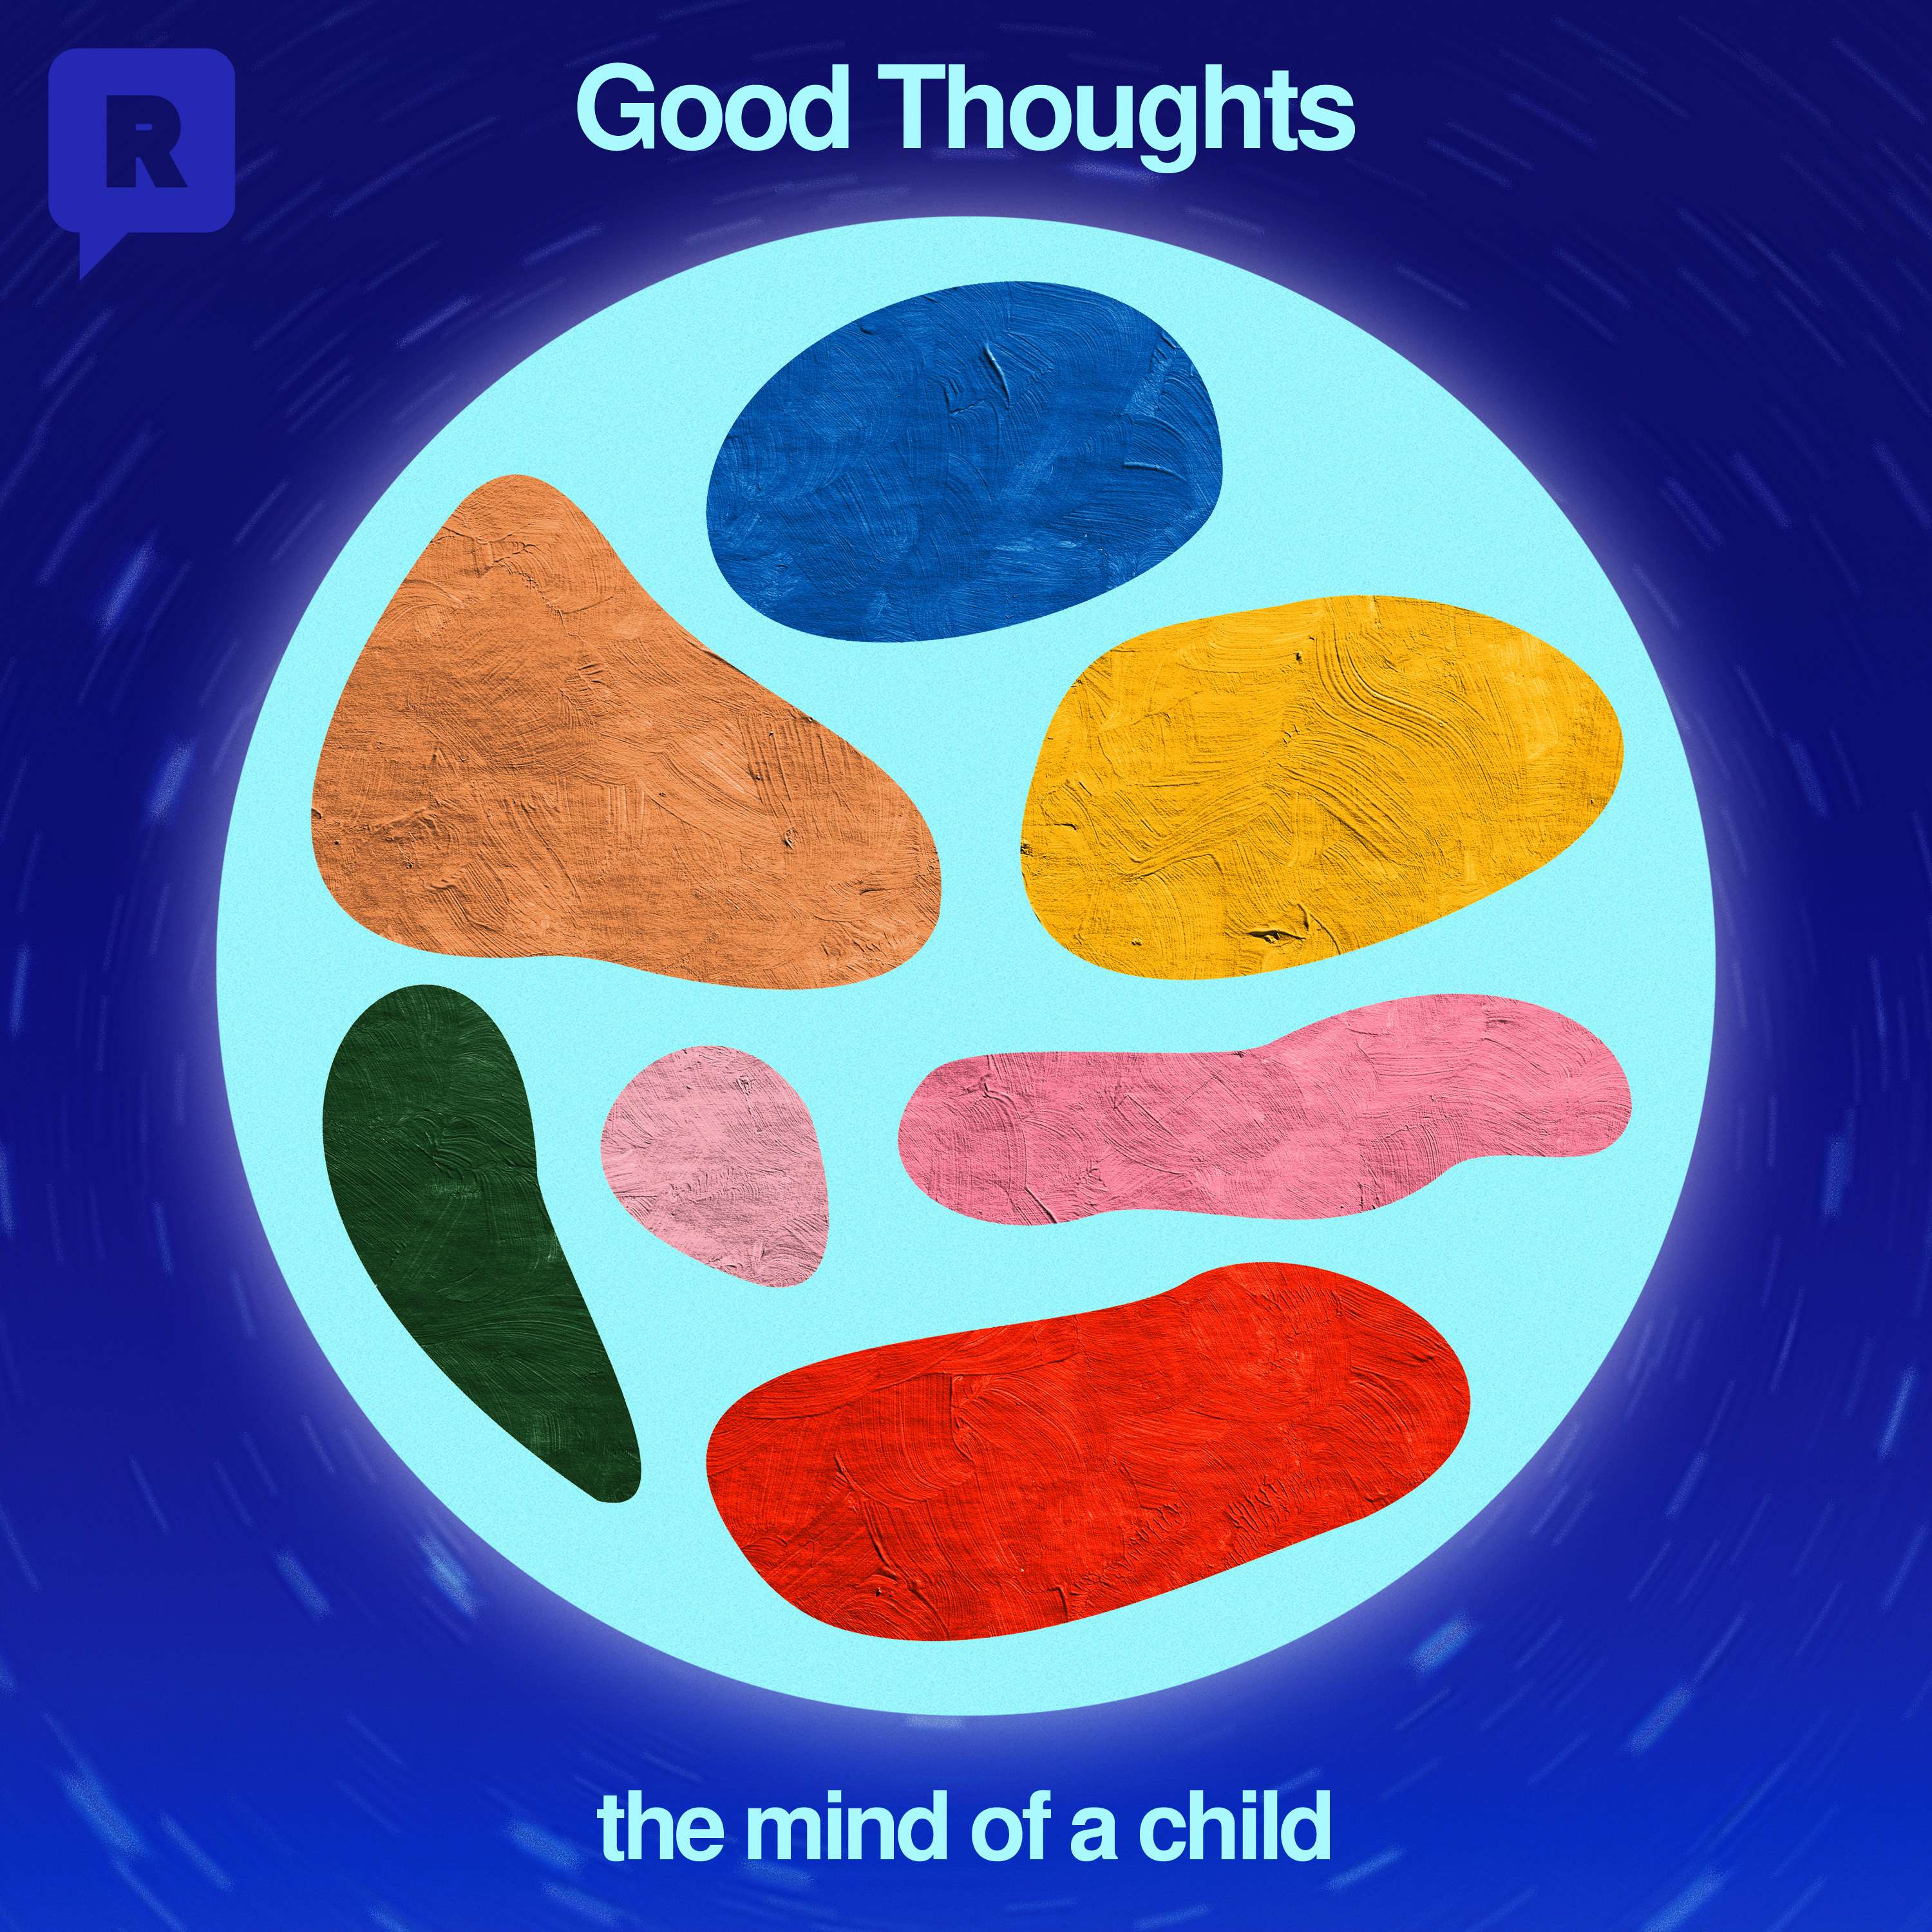 Good Thoughts: 'In the Dark', Genesis 1:2-5, and 'Twinkle Twinkle Little Star'